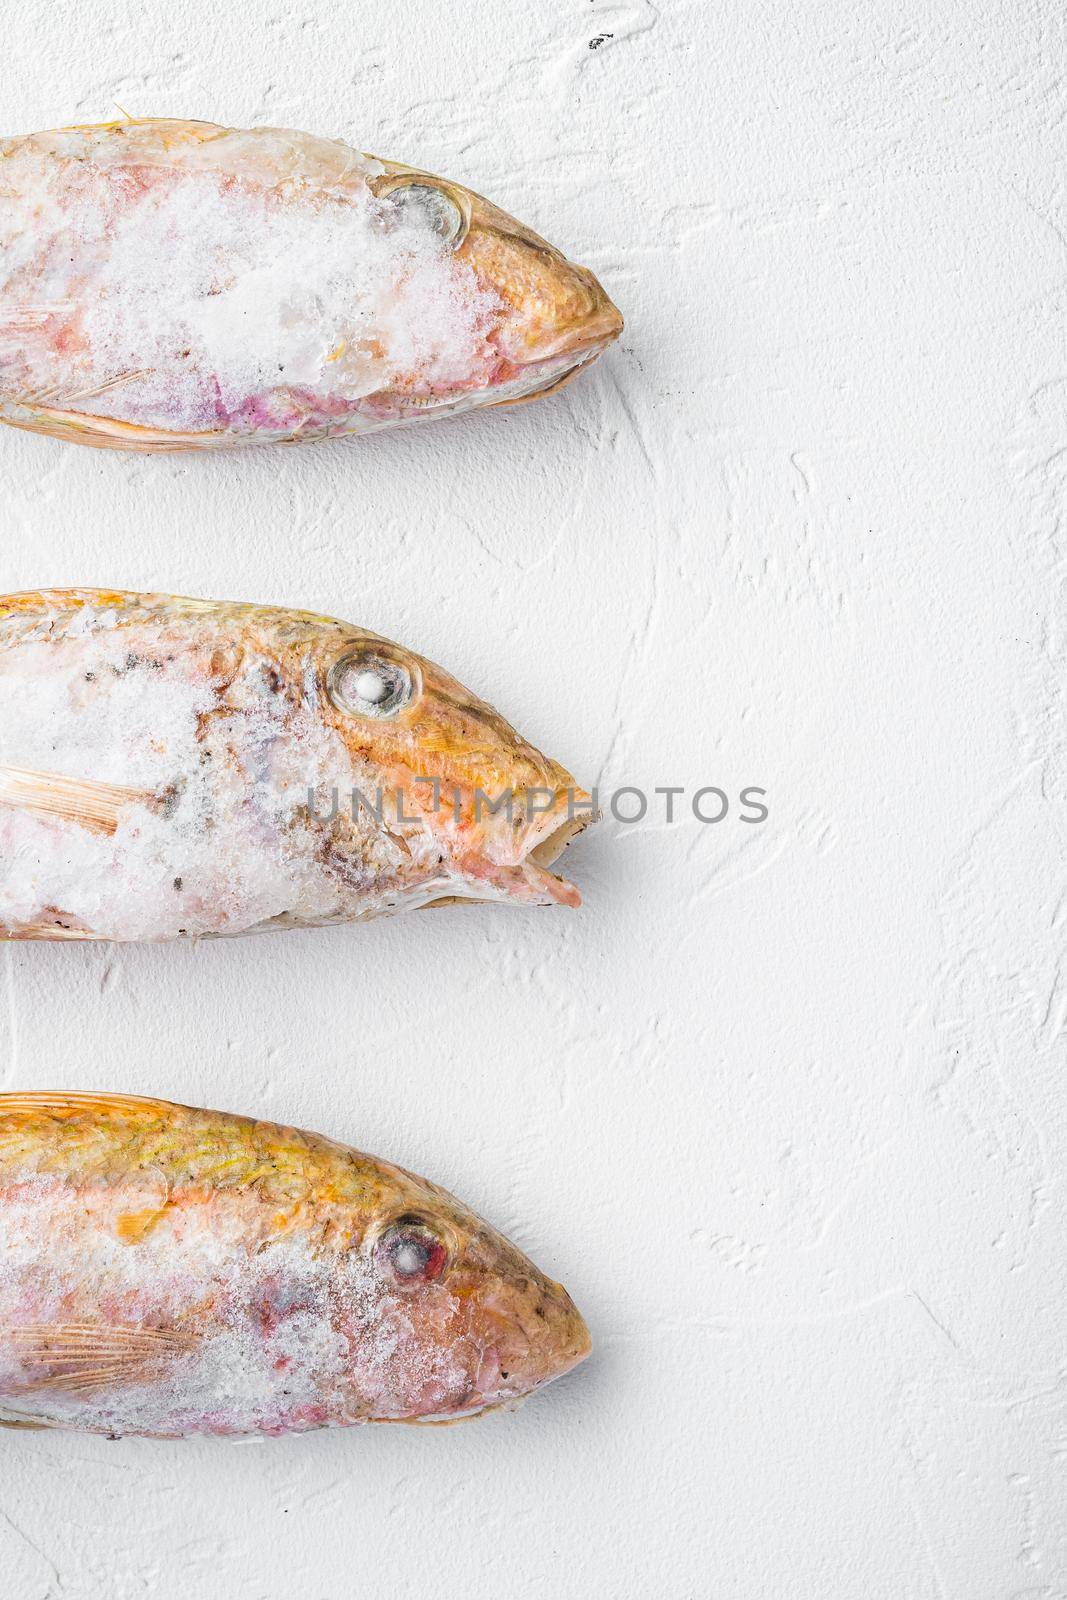 Frozen Goatfish raw fish set, on white stone table background, top view flat lay , with copy space for text